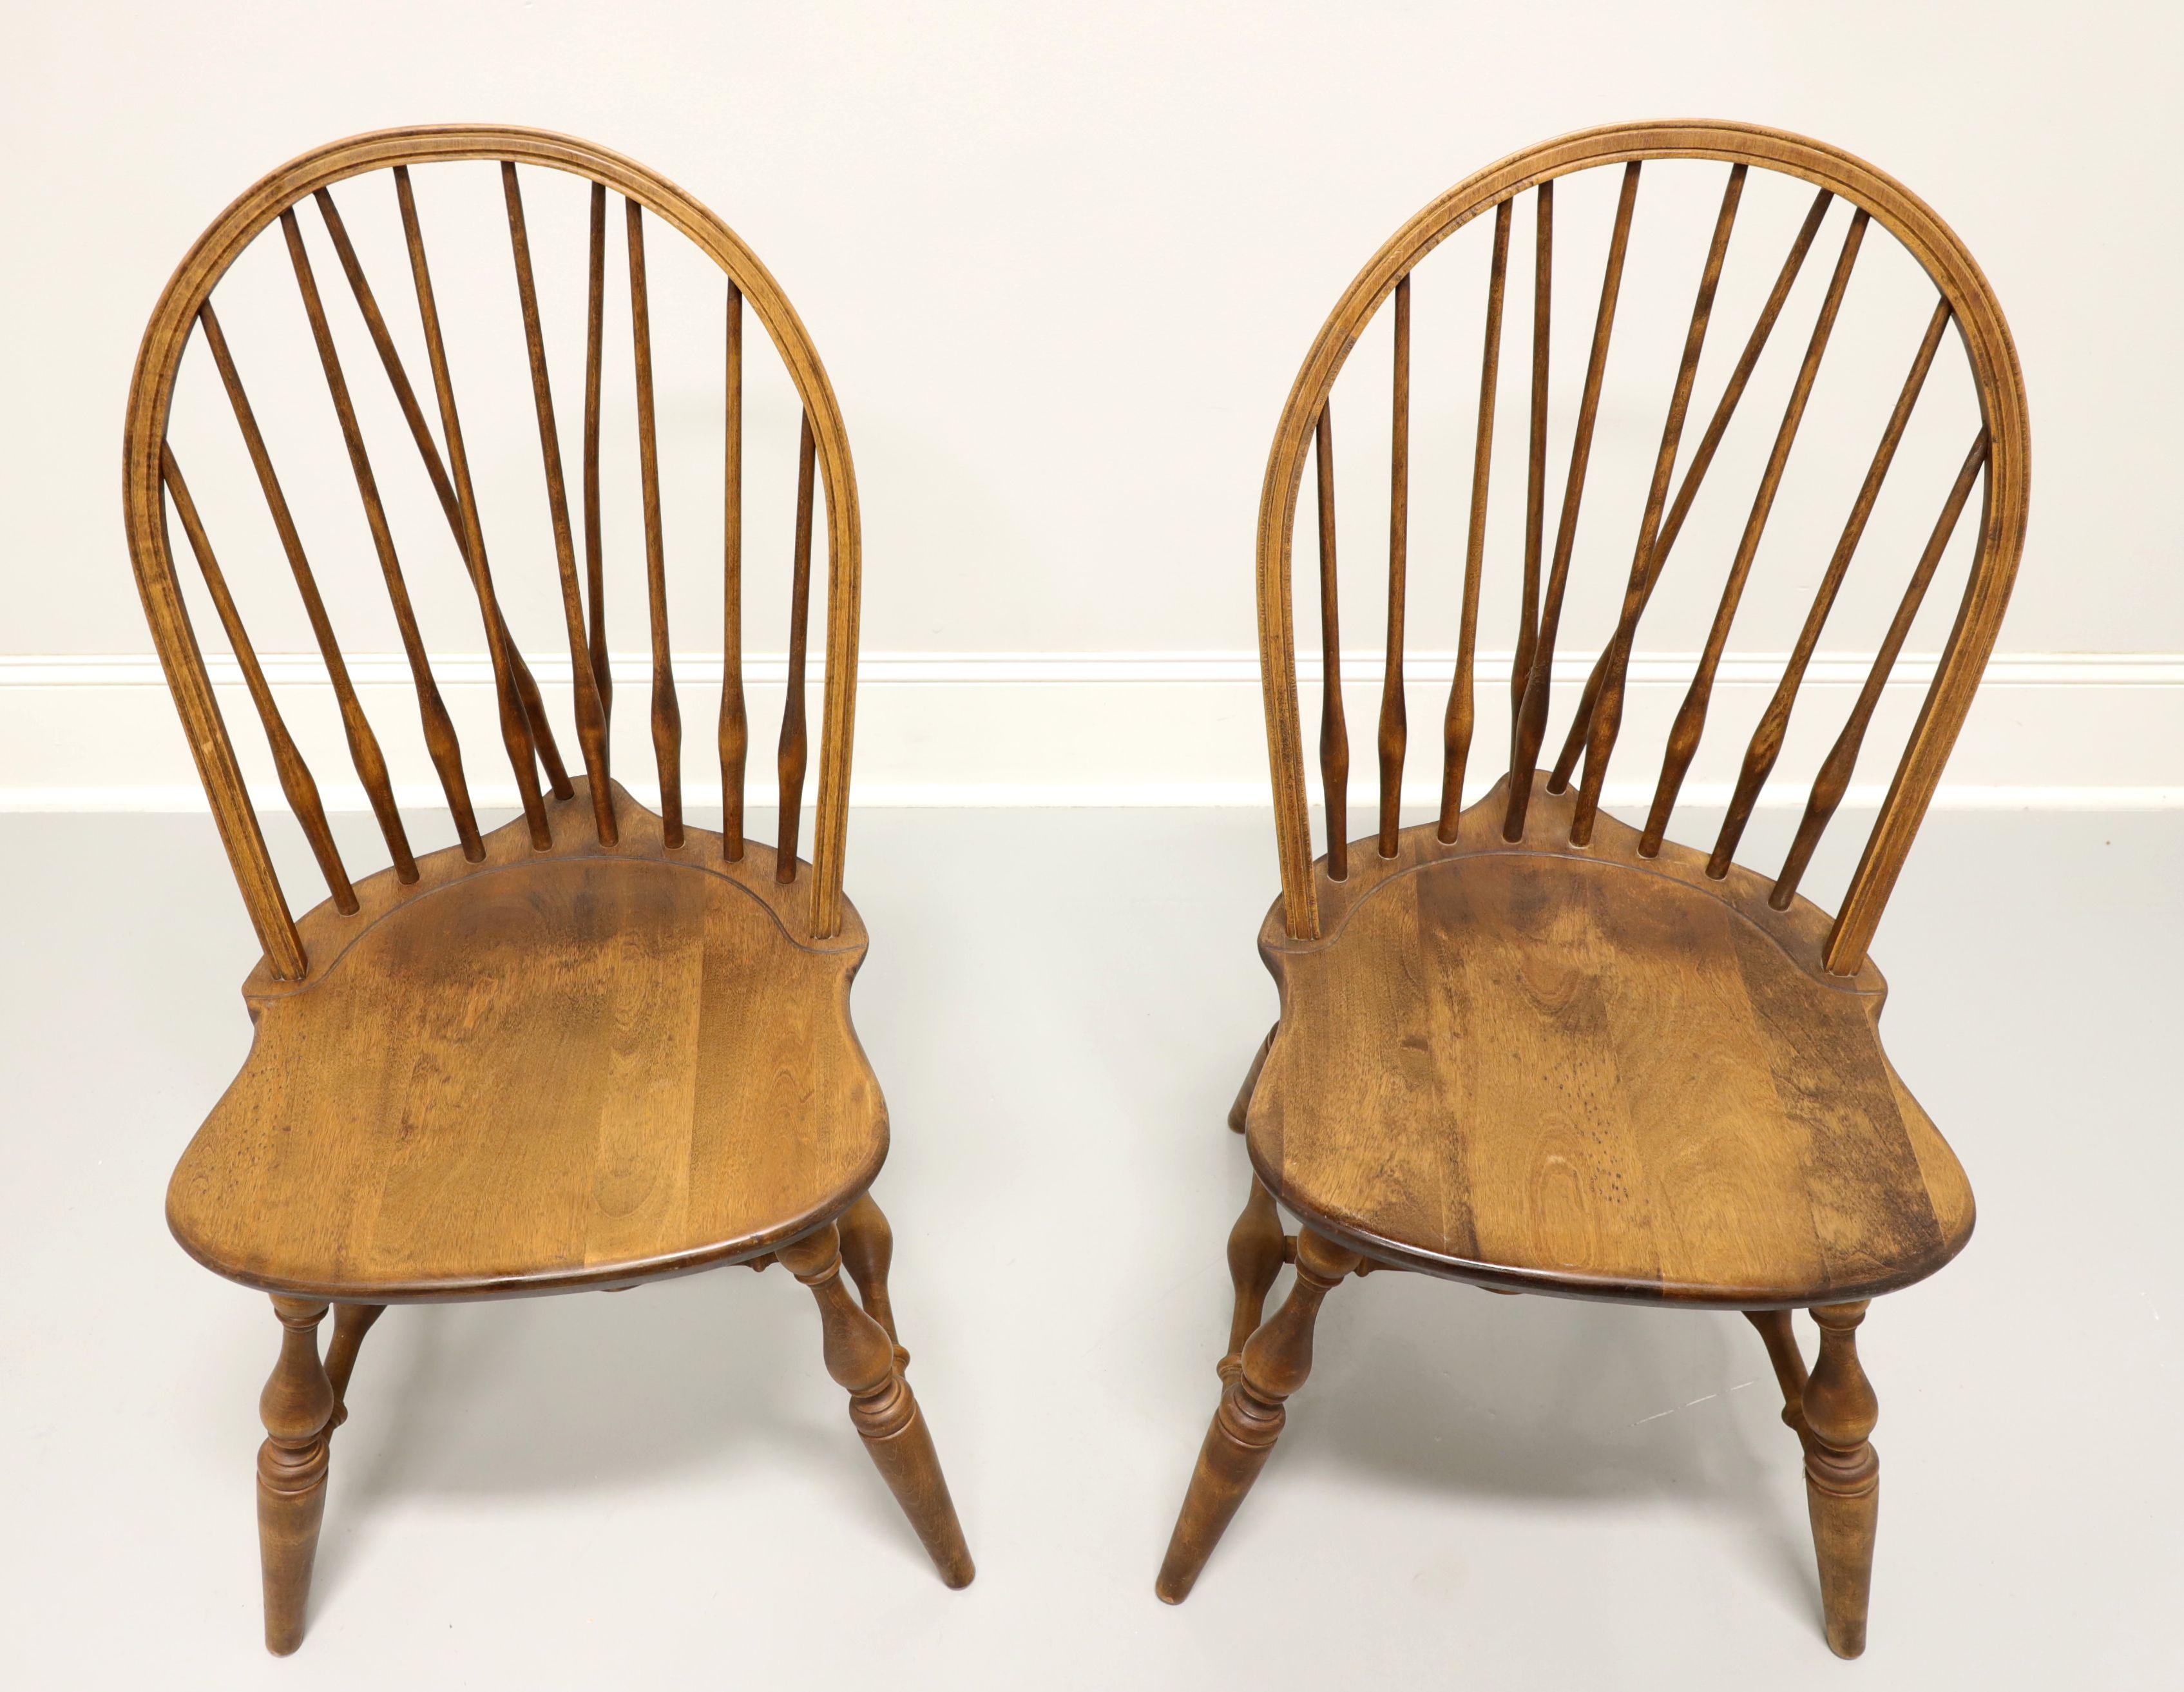 A pair of Windsor style dining side chairs by Habersham Plantation, of Clarksville, Georgia, USA. Solid pine, hoop back with spindles, saddle shape seat, tail-supports with spindles, turned legs and stretchers. Made in the late 20th